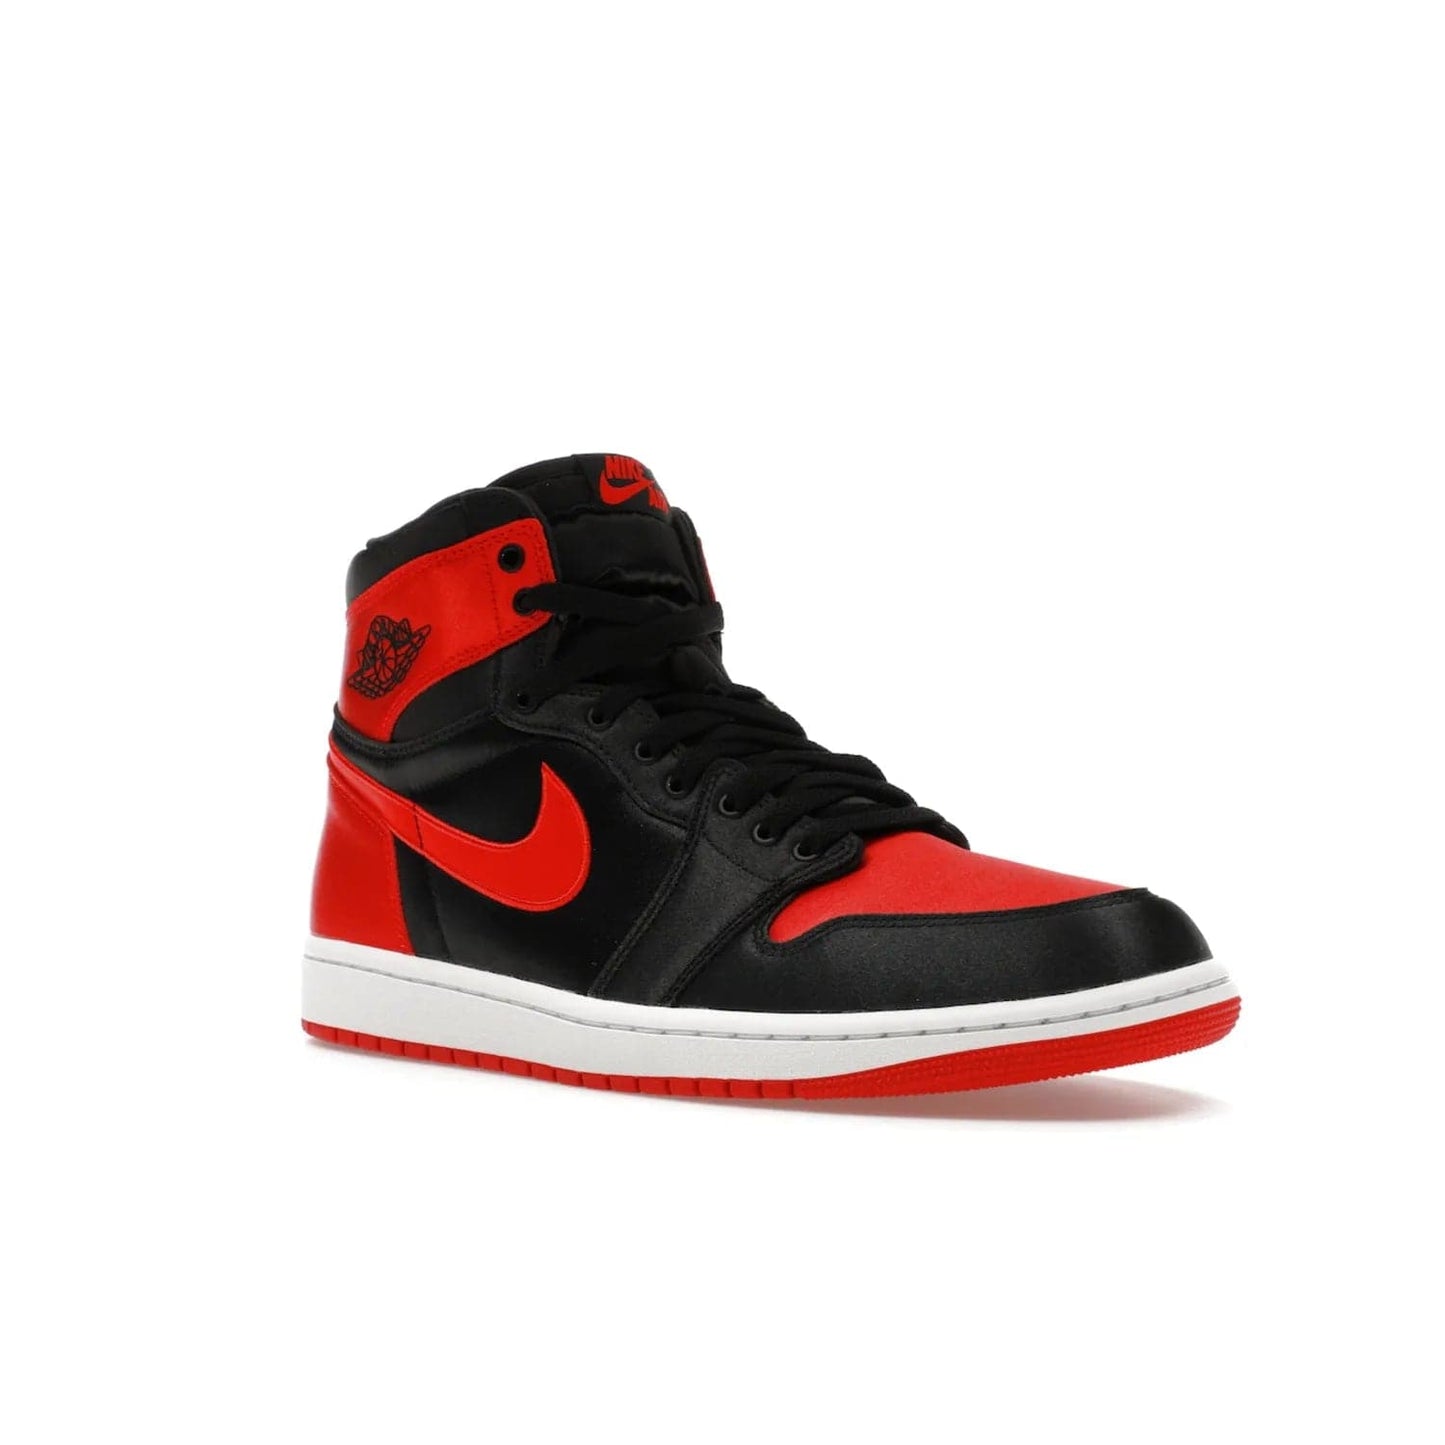 Jordan 1 Retro High OG Satin Bred (Women's) - Image 5 - Only at www.BallersClubKickz.com - Introducing the Jordan 1 Retro High OG Satin Bred (Women's). Luxe satin finish, contrasting hues & classic accents. Trending sneakers symbolizing timelessness & heritage. Make a bold statement with this iconic shoe. Available October 4, 2023.